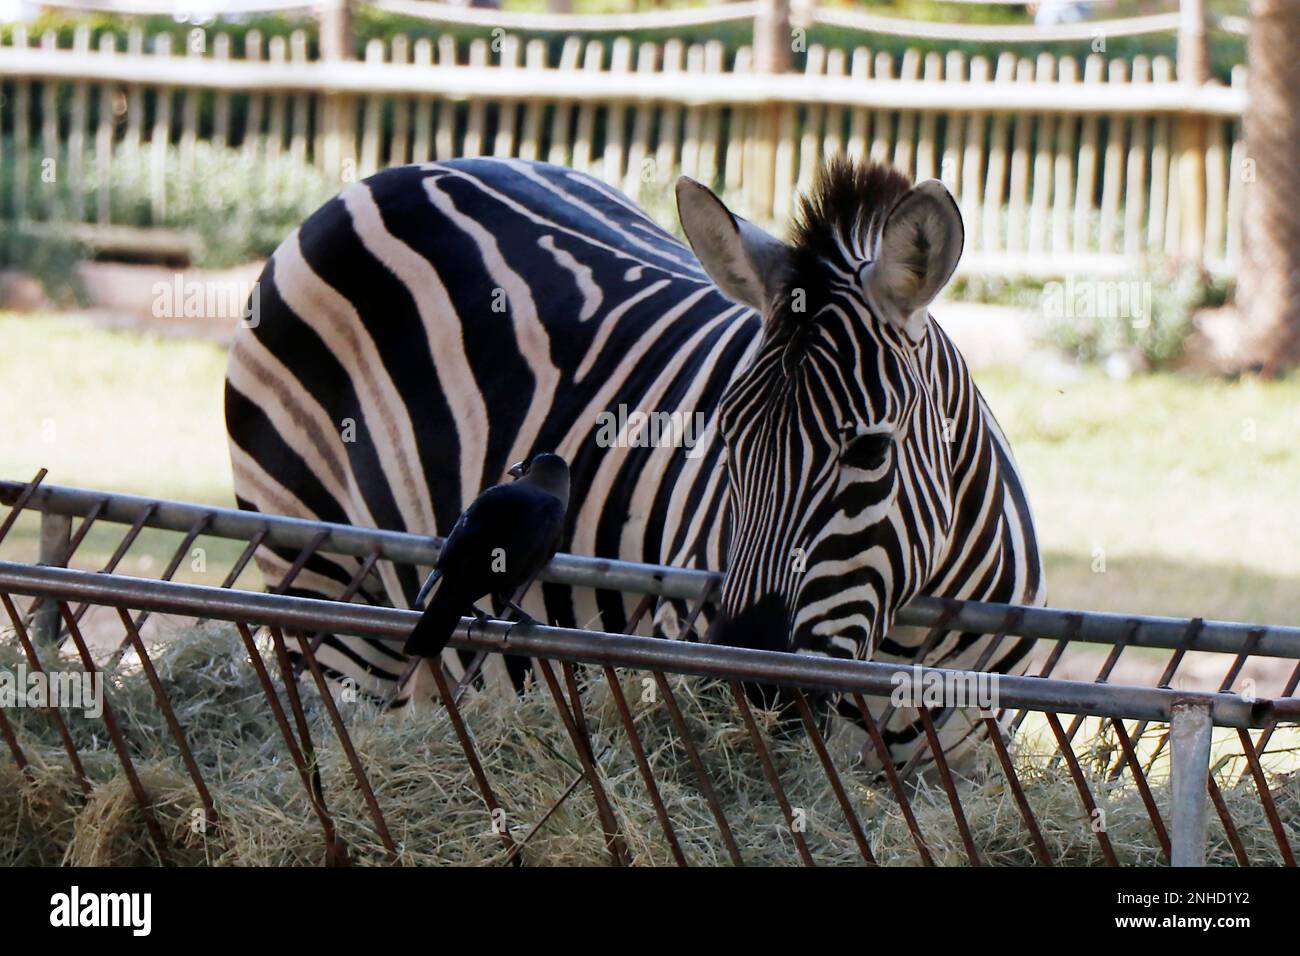 Zebras (subgenus Hippotigris) are African equines with distinctive black-and-white striped coats. Stock Photo